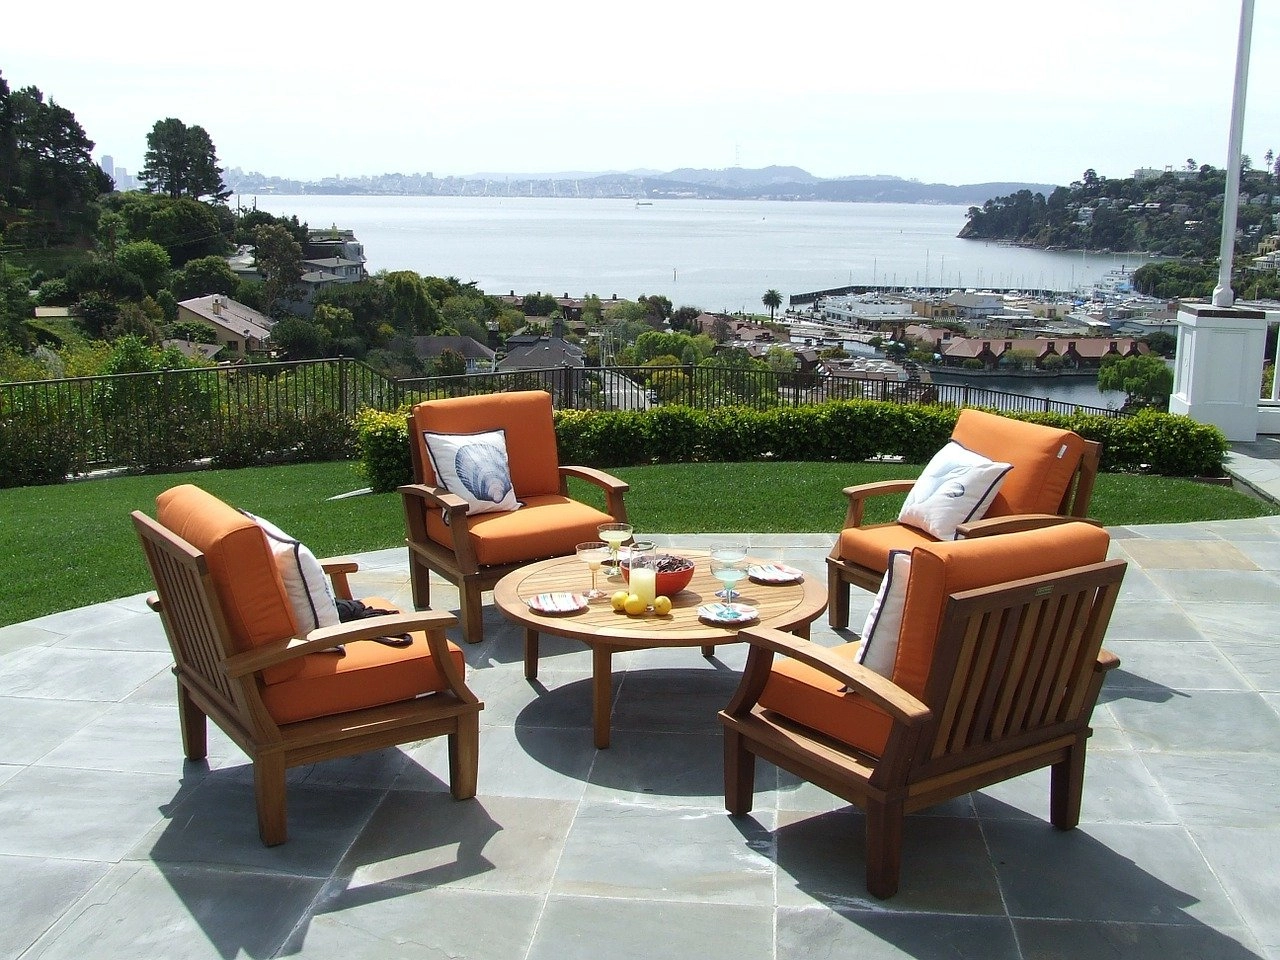 An image of a patio with a furniture set that has orange seat cushions.